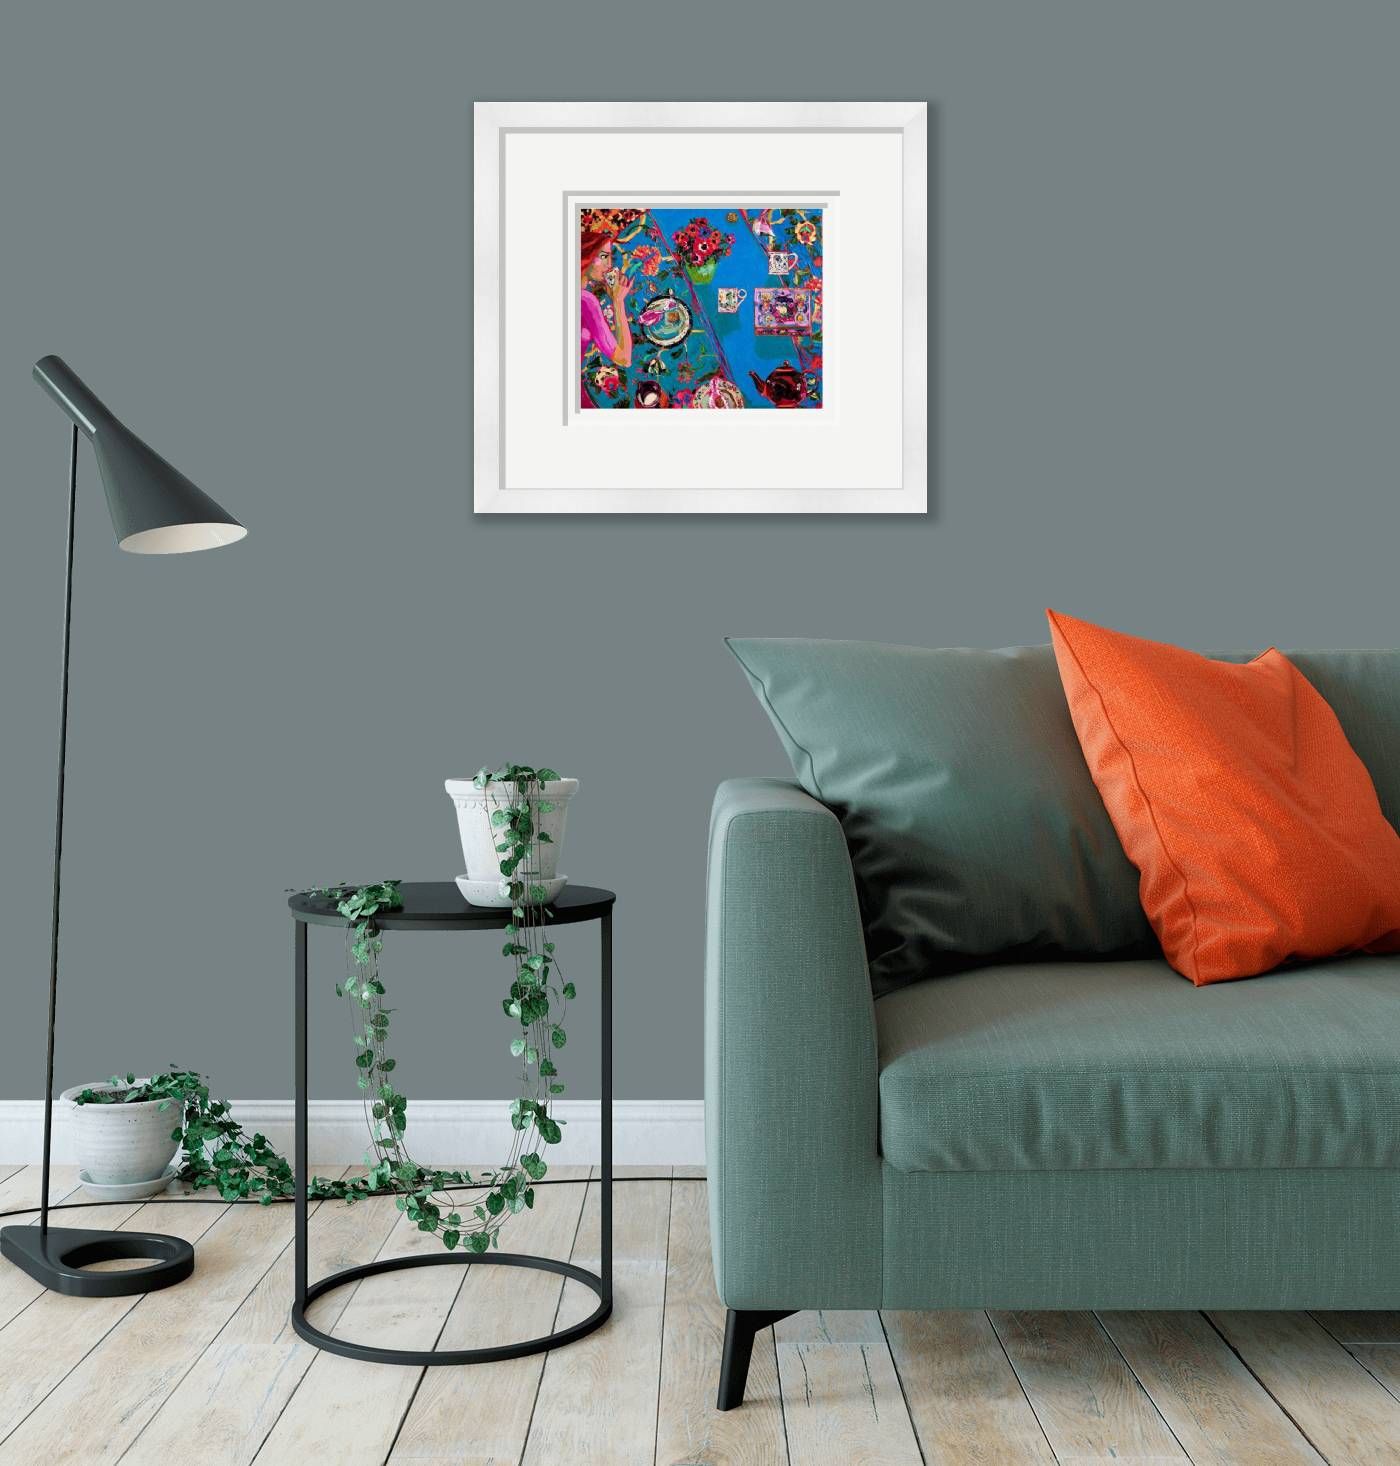 Large framed - Amaretti and Tea by Lucy Doyle